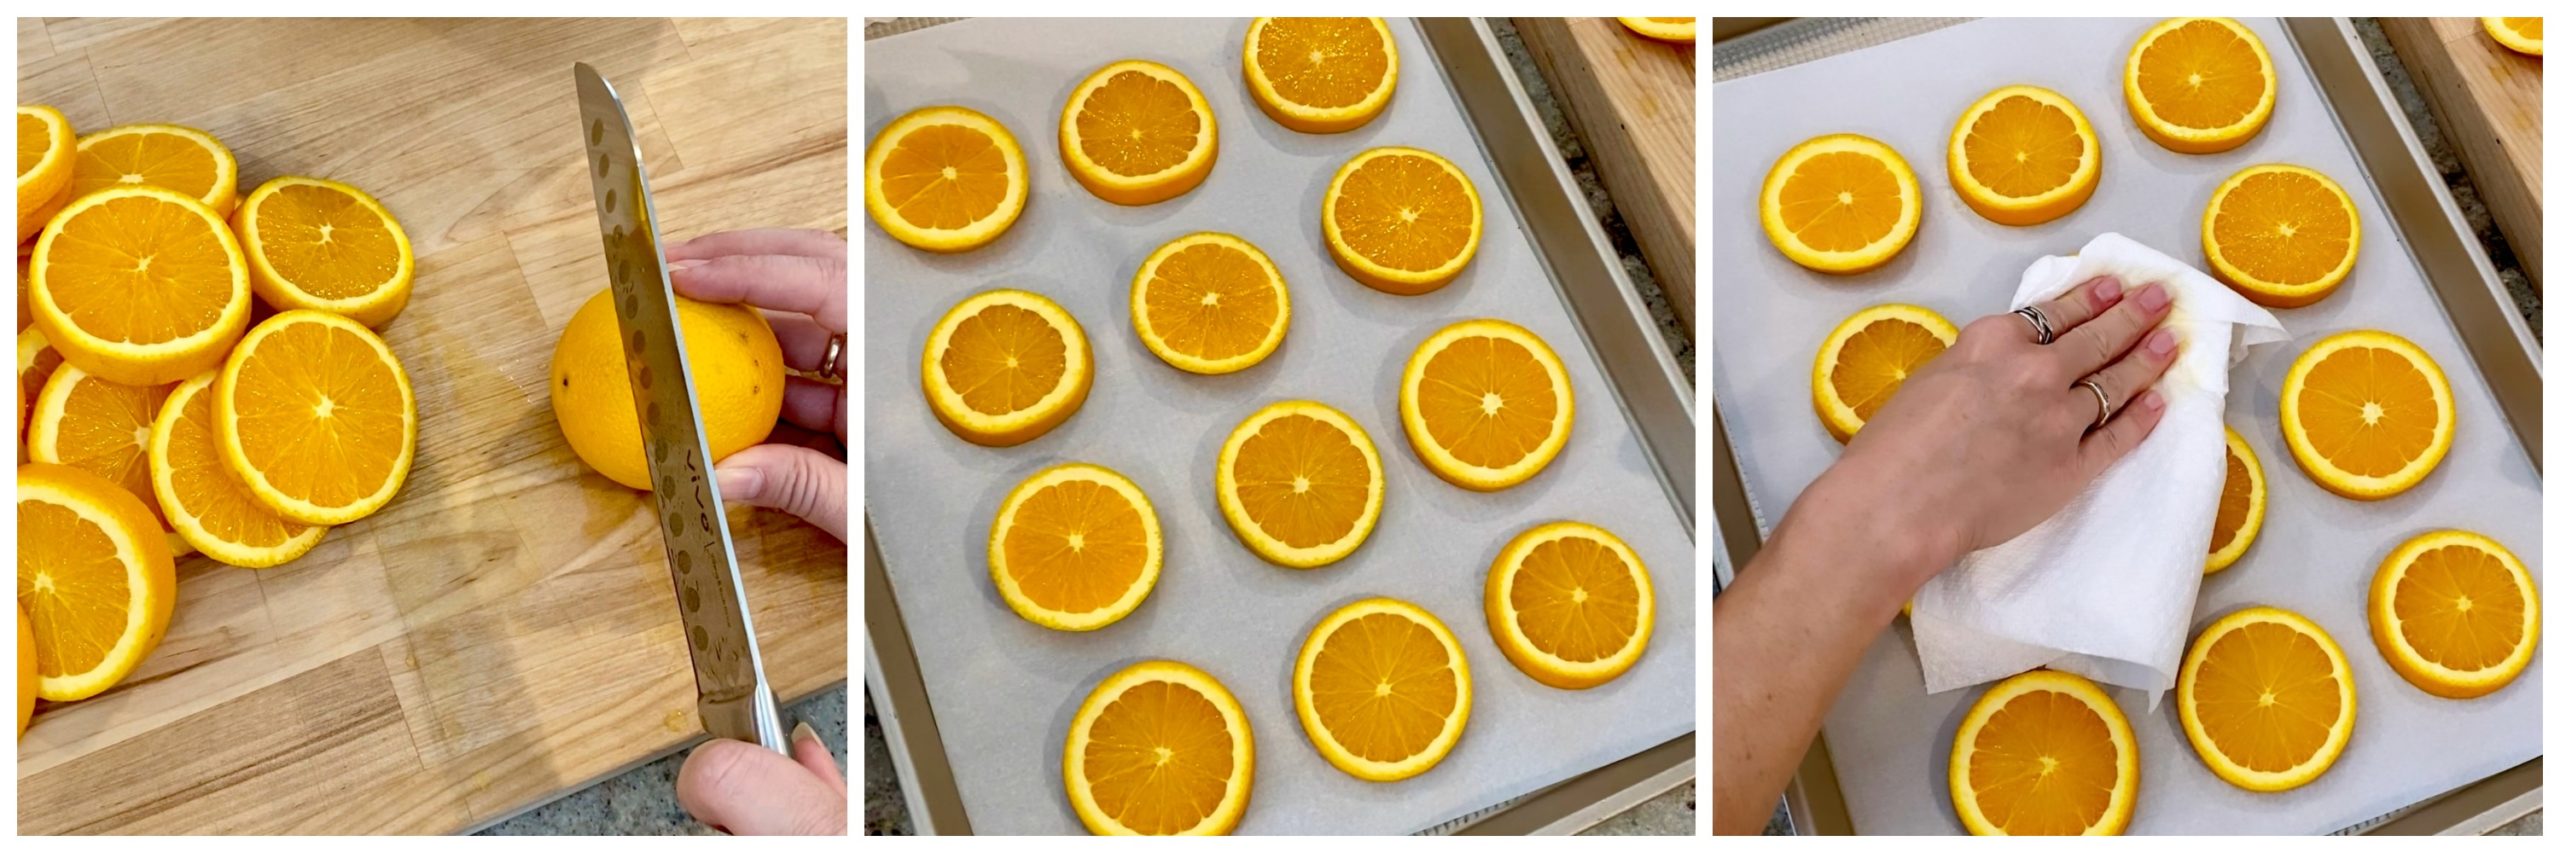 Collage of how to make dried orange garland: slicing oranges, placing them on cookie sheet, and blotting them with paper towels.